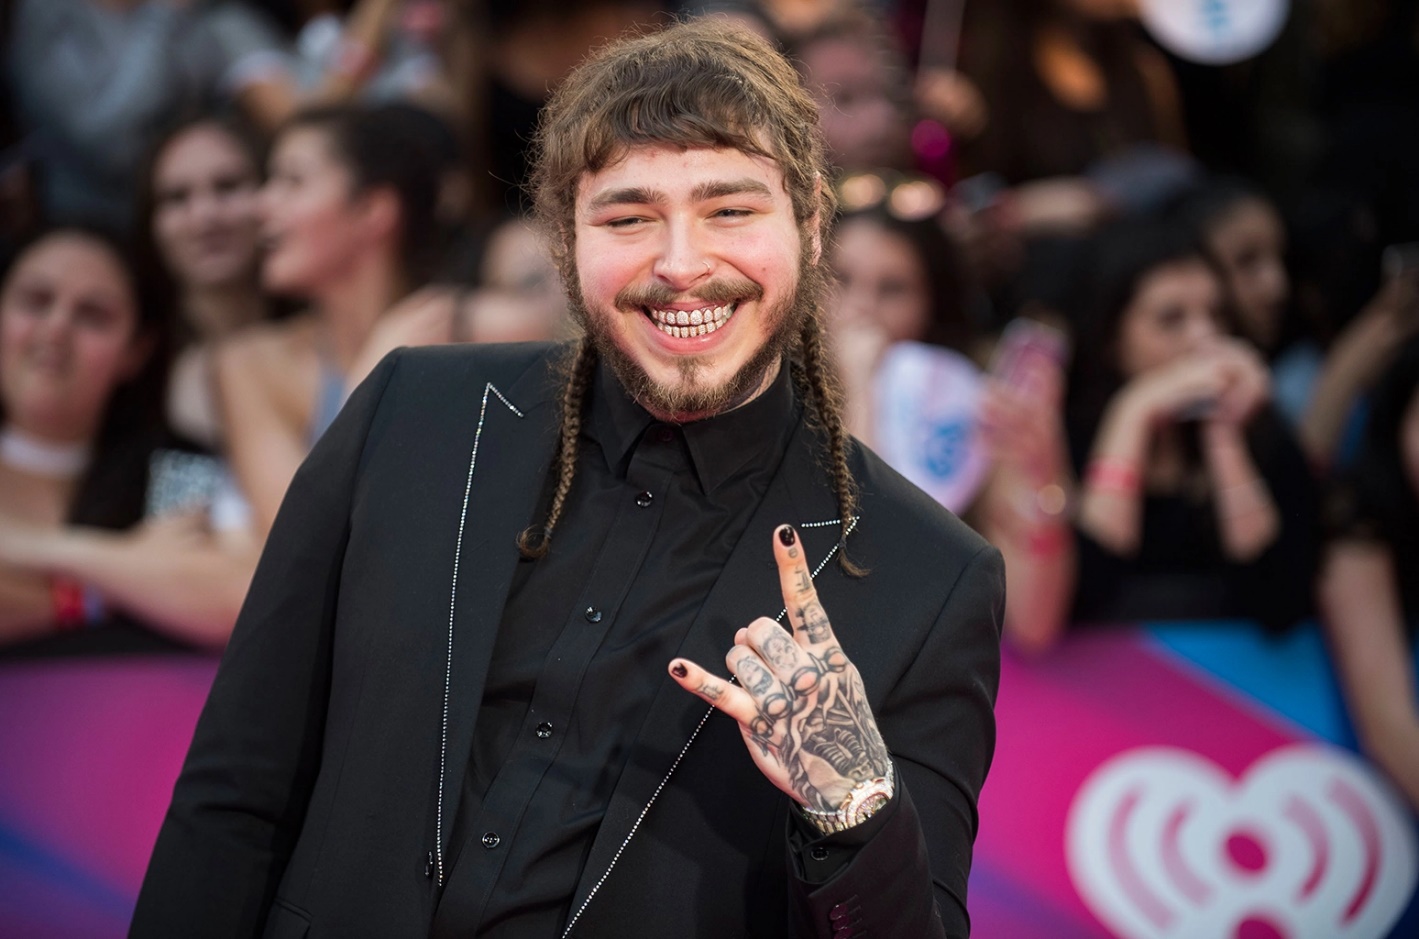 POST MALONE BABY GIRL WITH FIANCEE Africa Equity Media